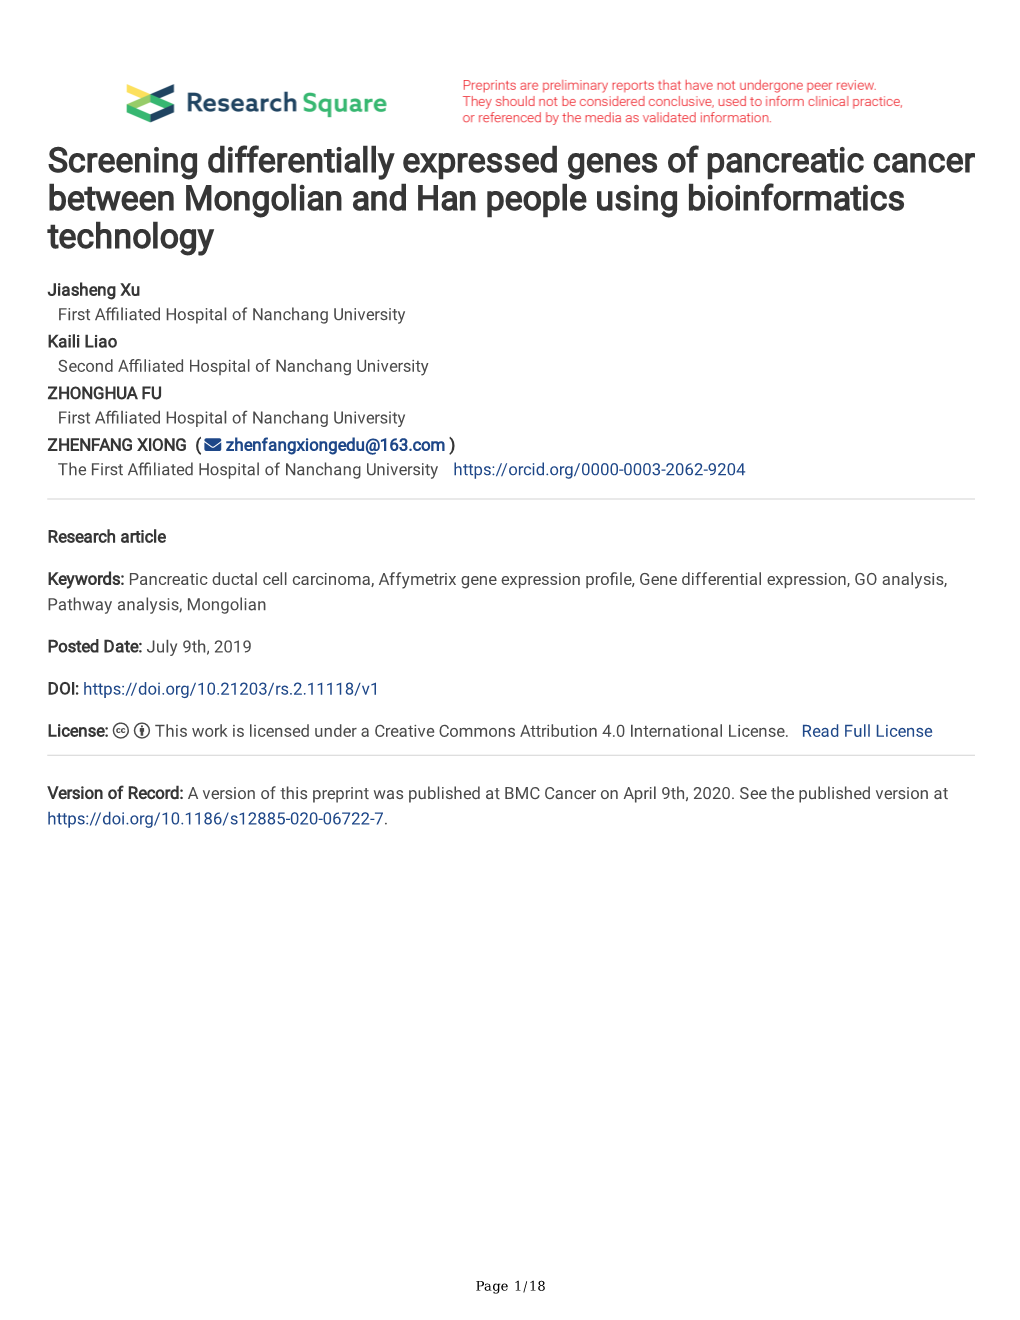 Screening Differentially Expressed Genes of Pancreatic Cancer Between Mongolian and Han People Using Bioinformatics Technology